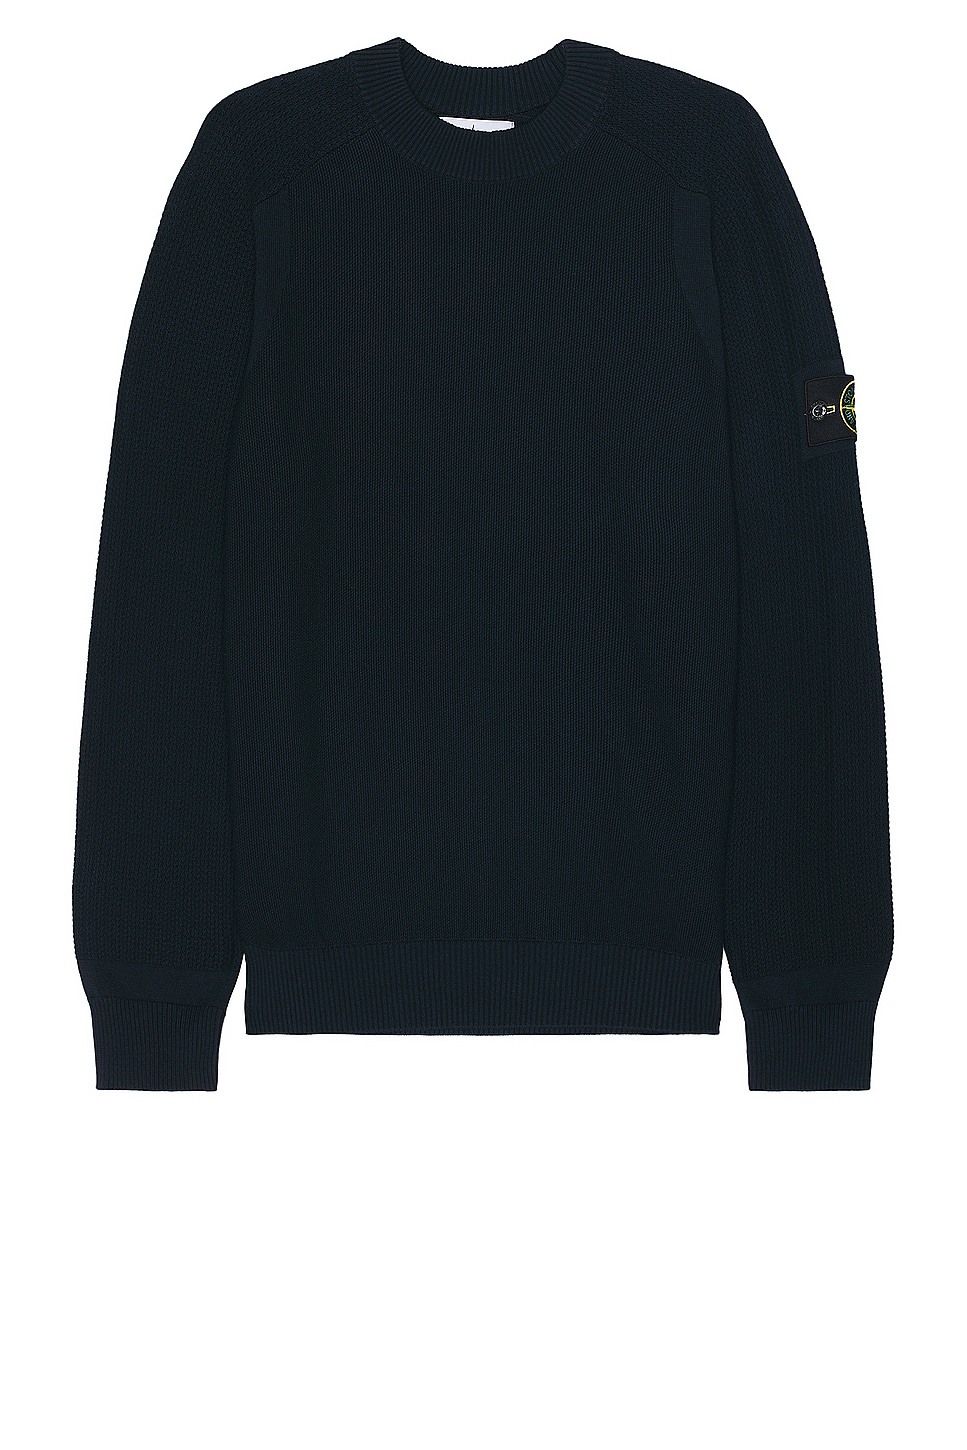 Image 1 of Stone Island Sweater in Navy Blue